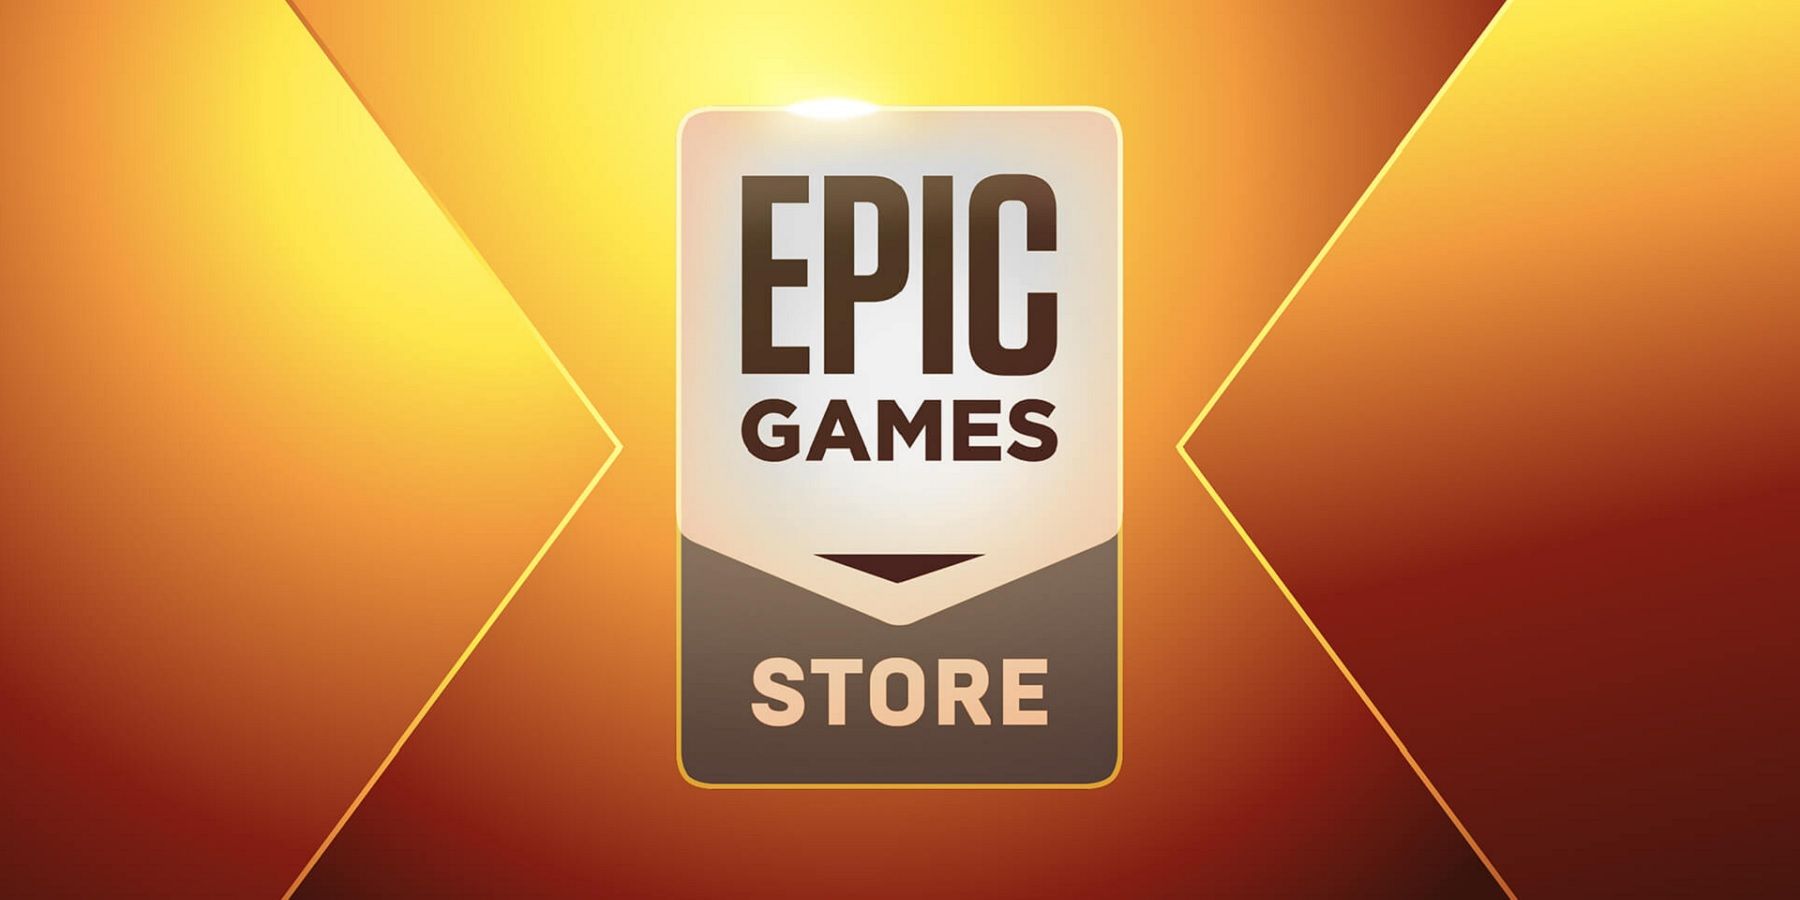 Free games on the Epic Games Store for November 2022